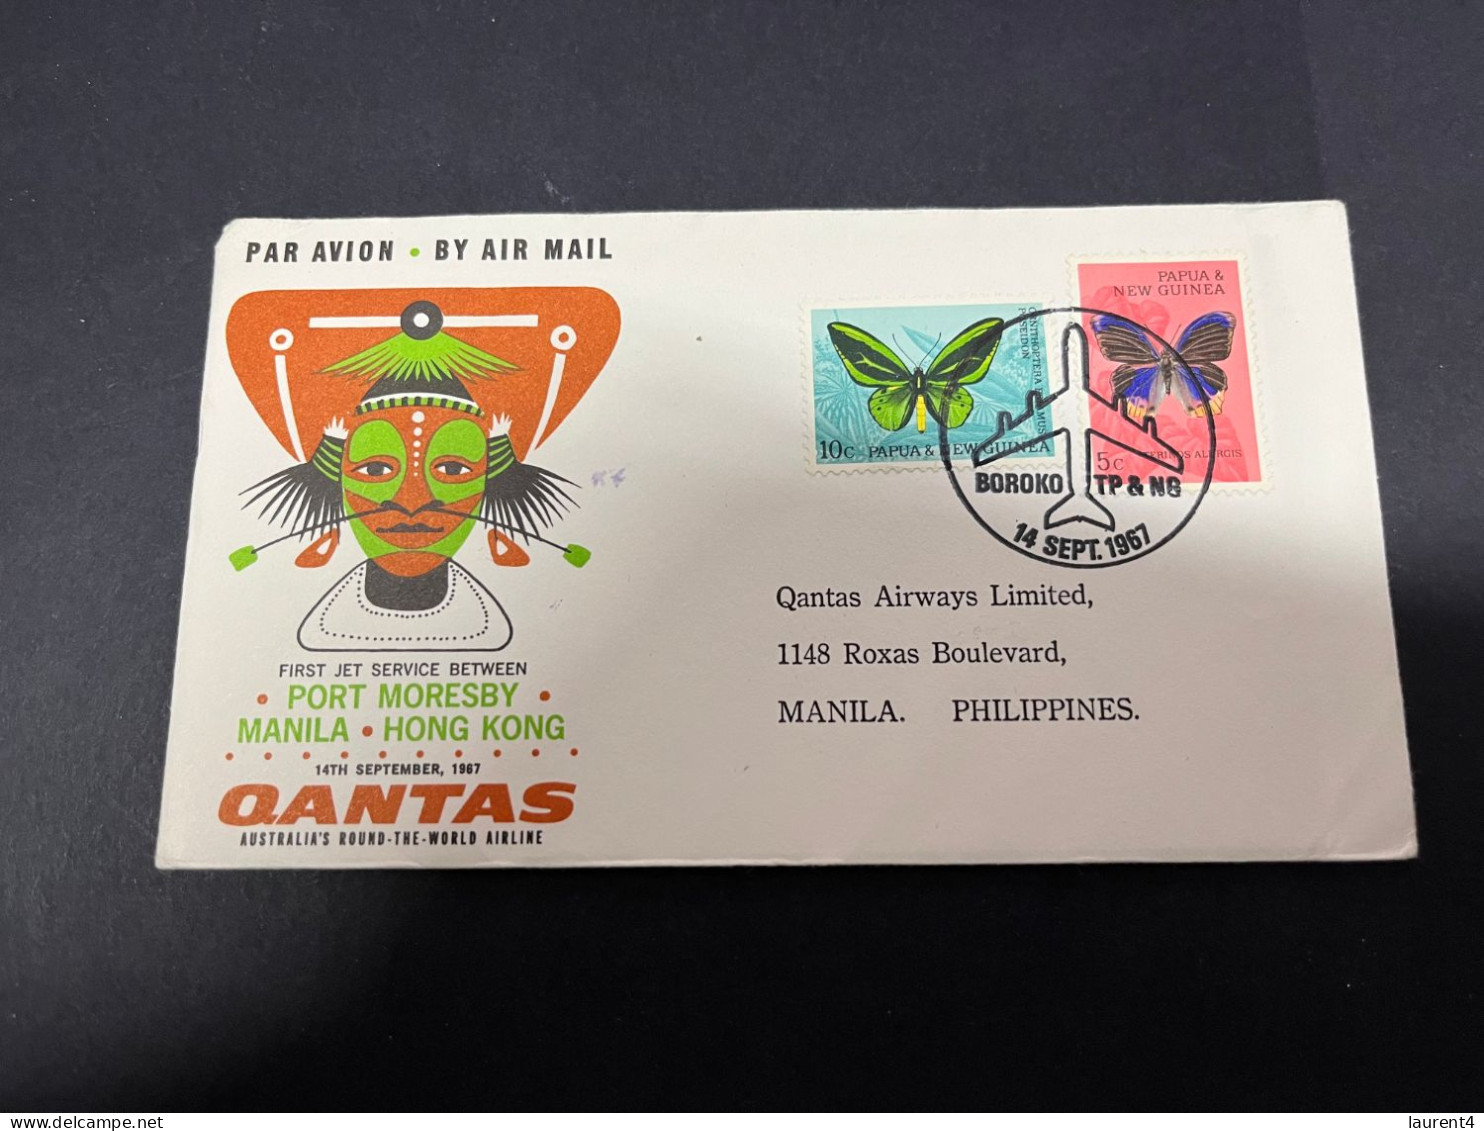 4-12-2023 (1 W 18) Papua New Guinea 1967 Cover (Butterfly Stamp)- QANTAS 1st Flight Port Moresbi - Manila - Hong Hong - Andere (Lucht)